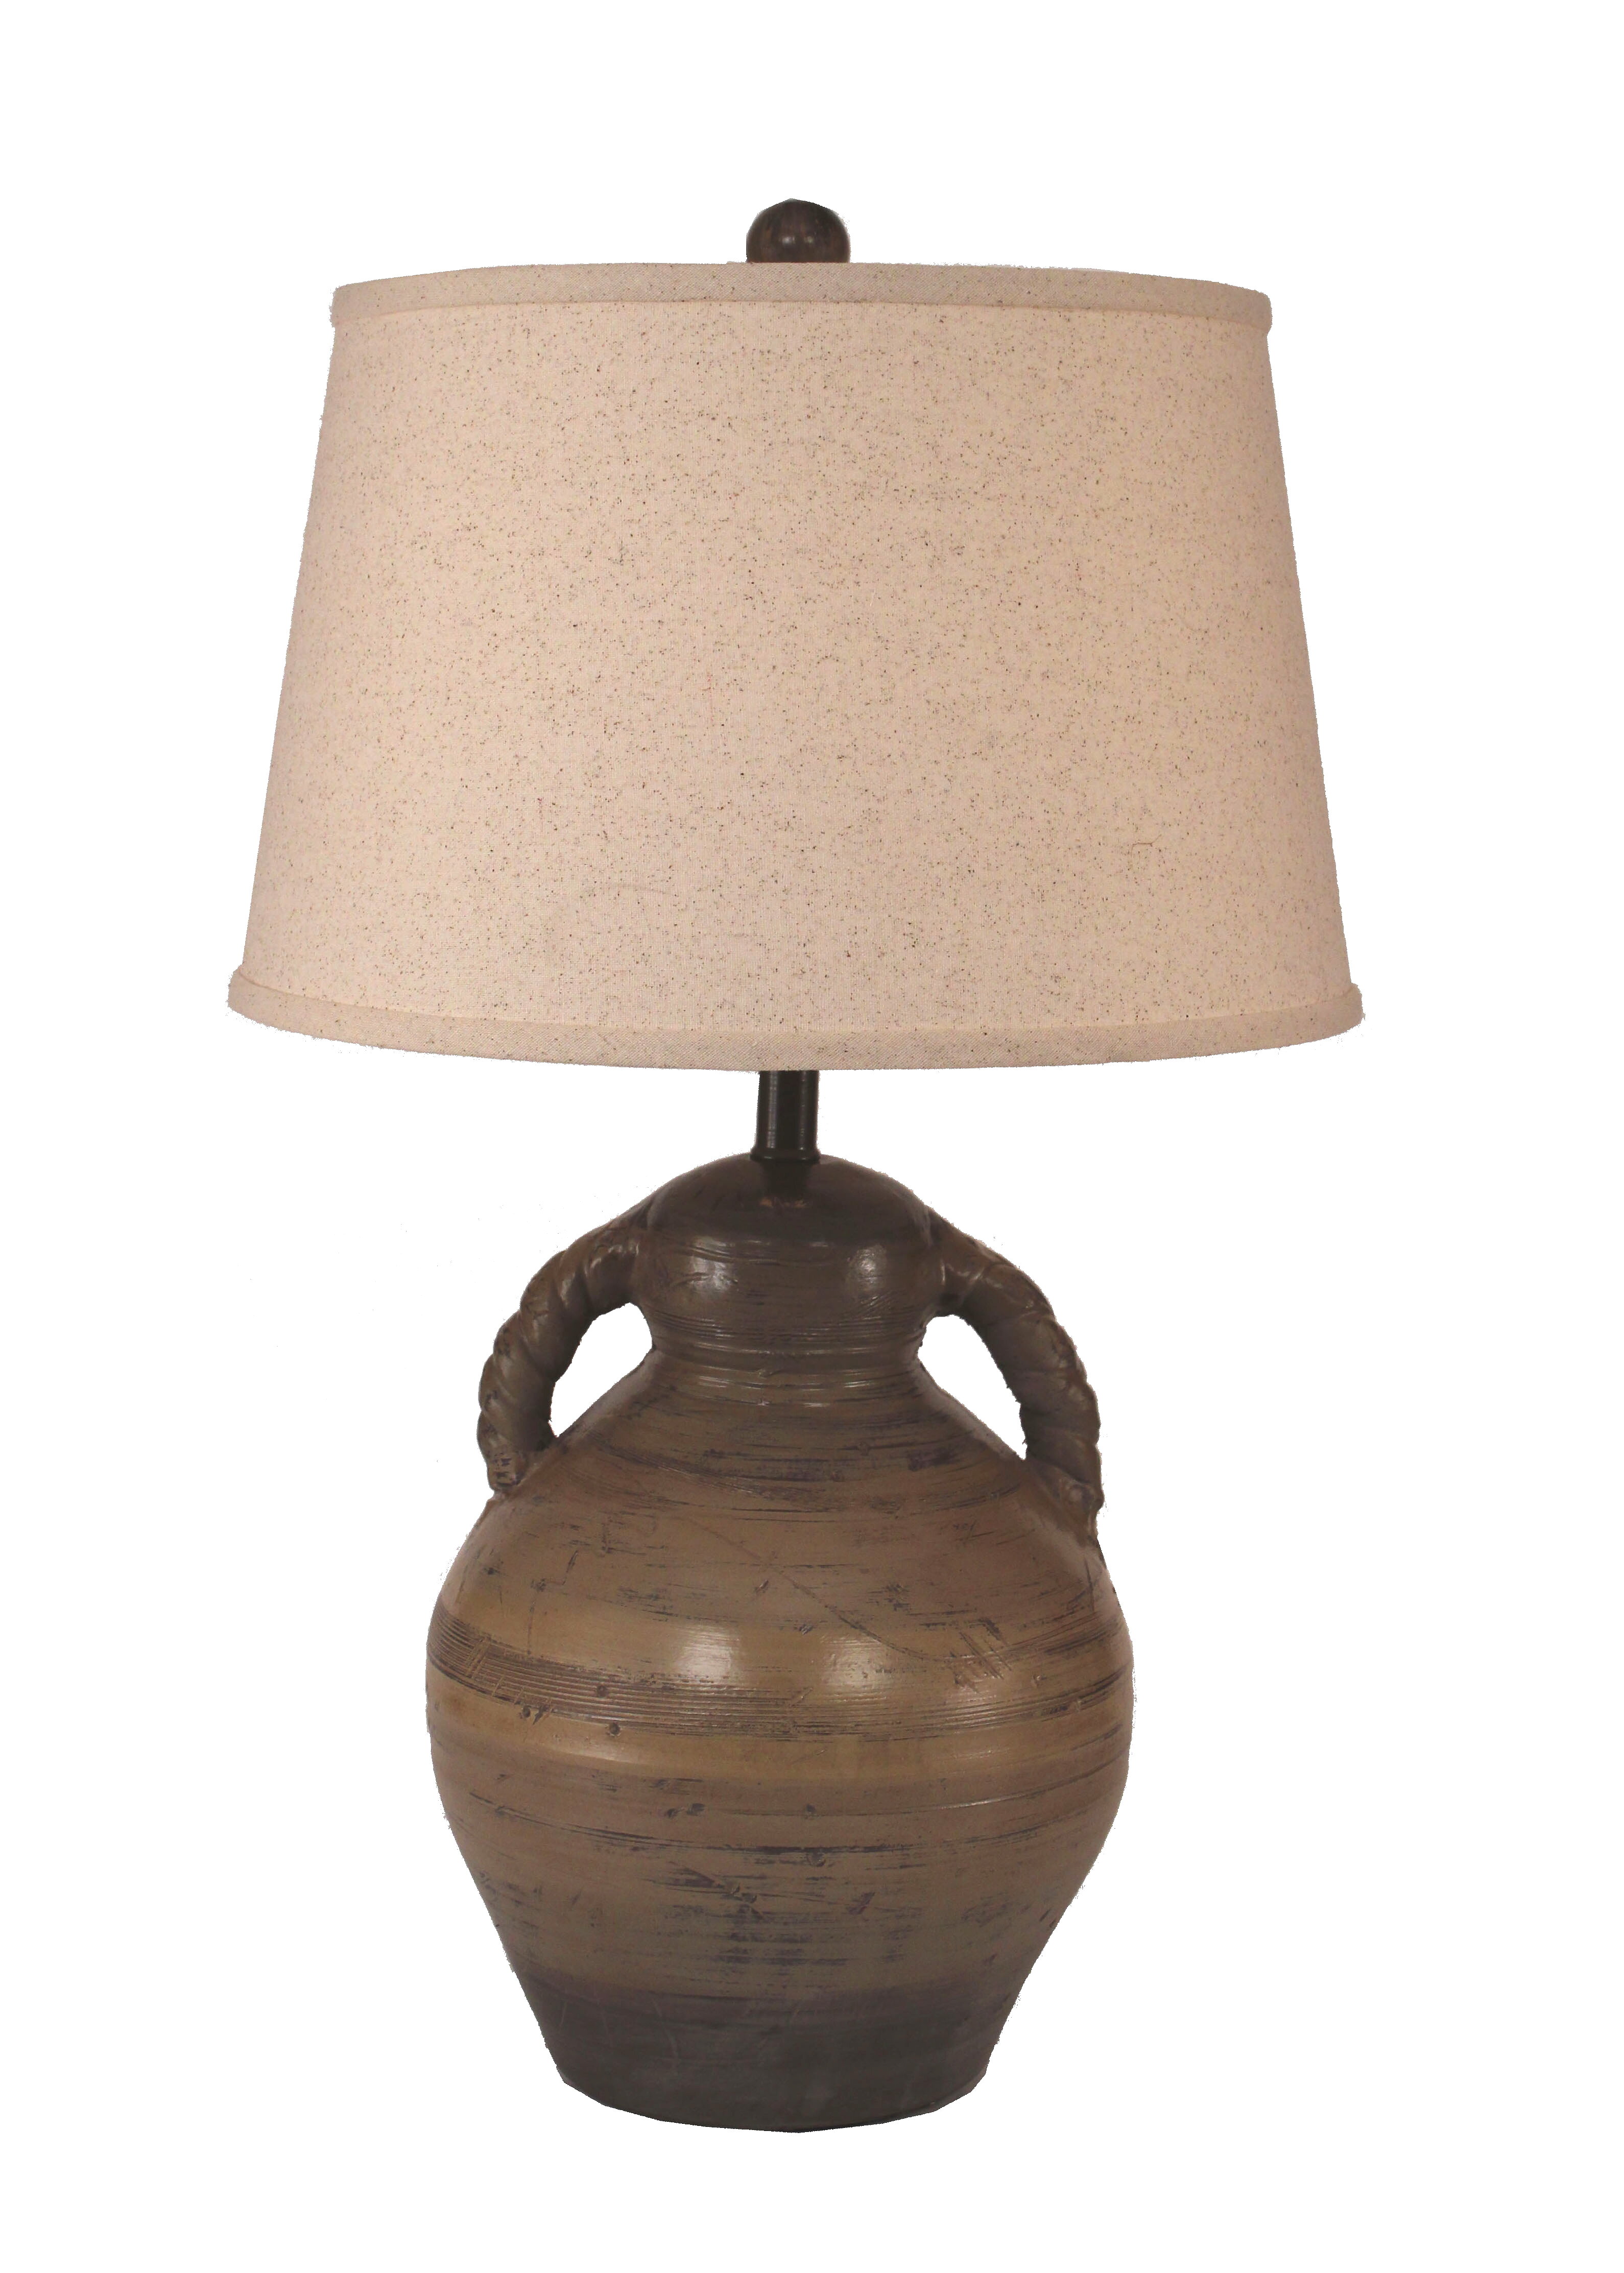 pottery table lamp